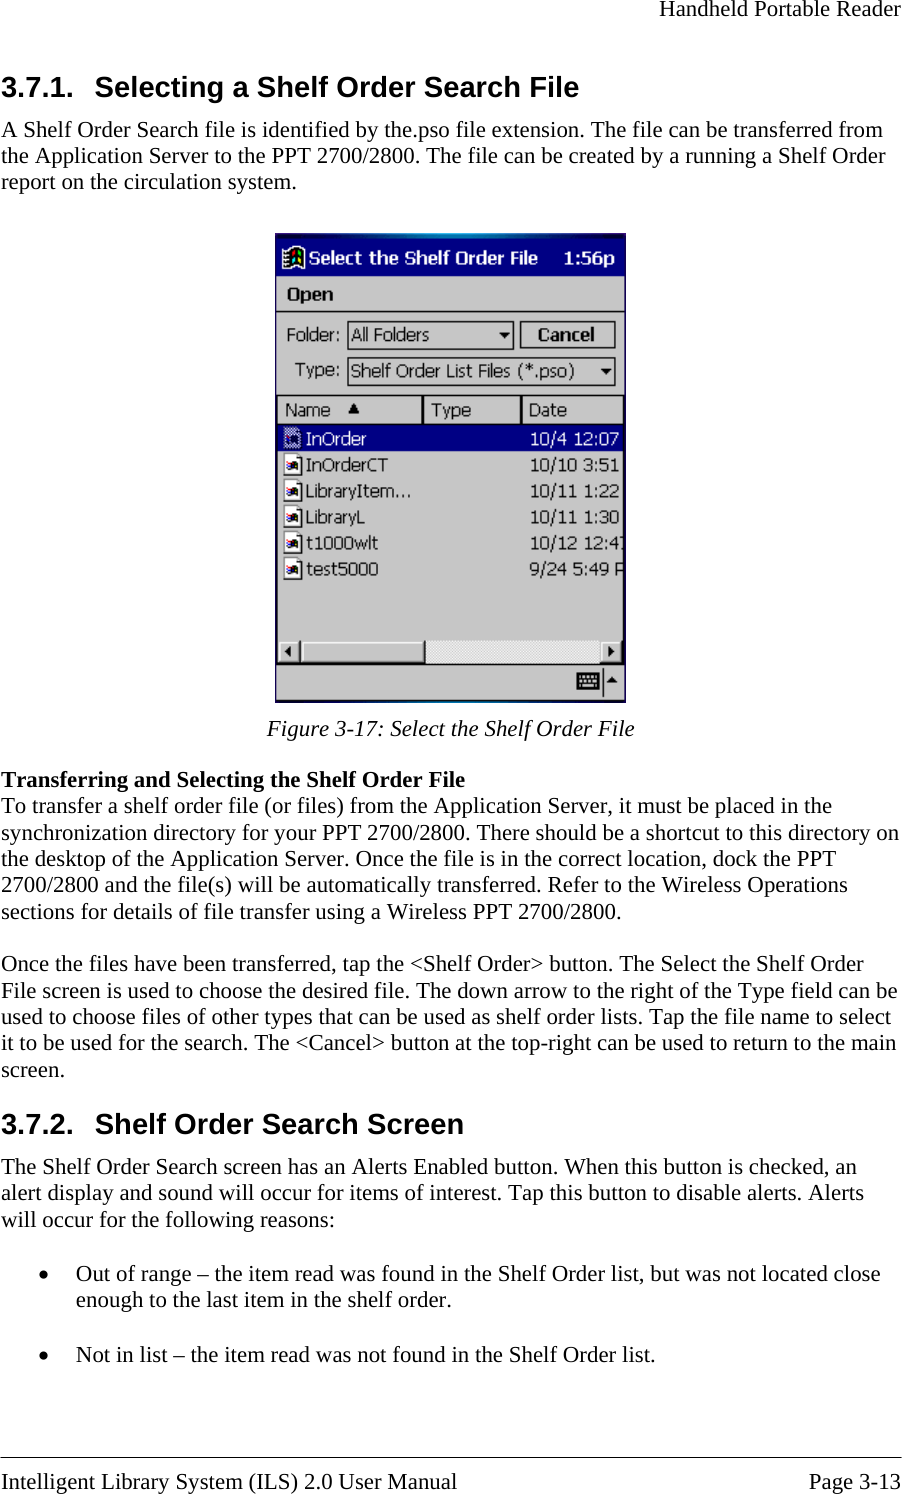     Handheld Portable Reader   3.7.1.  Selecting a Shelf Order Search File helf Order A Shelf Order Search file is identified by the.pso file extension. The file can be transferred from the Application Server to the PPT 2700/2800. The file can be created by a running a Sport on the circulation system. re  Figure 3-17: Select the Shelf Order File Transferring and Selecting the Shelf Order File To transfer a shelf order file (or files) from the Application Server, it must be placed in the synchronization directory for your PPT 2700/2800. There should be a shortcut to this directory on the desktop of the Application Server. Once the file is in the correct location, dock the PPT 2700/2800 and the file(s) will be automatically transferred. Refer to the Wireless Operations sections for details of file transfer using a Wireless PPT 2700/2800.  Once the files have been transferred, tap the &lt;SFile screen is used to cho of the Type field can be creen lose order. helf Order&gt; button. The Select the Shelf Order ose the desired file. The down arrow to the right used to choose files of other types that can be used as shelf order lists. Tap the file name to select it to be used for the search. The &lt;Cancel&gt; button at the top-right can be used to return to the main screen. 3.7.2.  Shelf Order Search SThe Shelf Order Search screen has an Alerts Enabled button. When this button is checked, an alert display and sound will occur for items of interest. Tap this button to disable alerts. Alerts will occur for the following reasons:  •  Out of range – the item read was found in the Shelf Order list, but was not located cenough to the last item in the shelf  •  Not in list – the item read was not found in the Shelf Order list.   Intelligent Library System (ILS) 2.0 User Manual  Page 3-13 